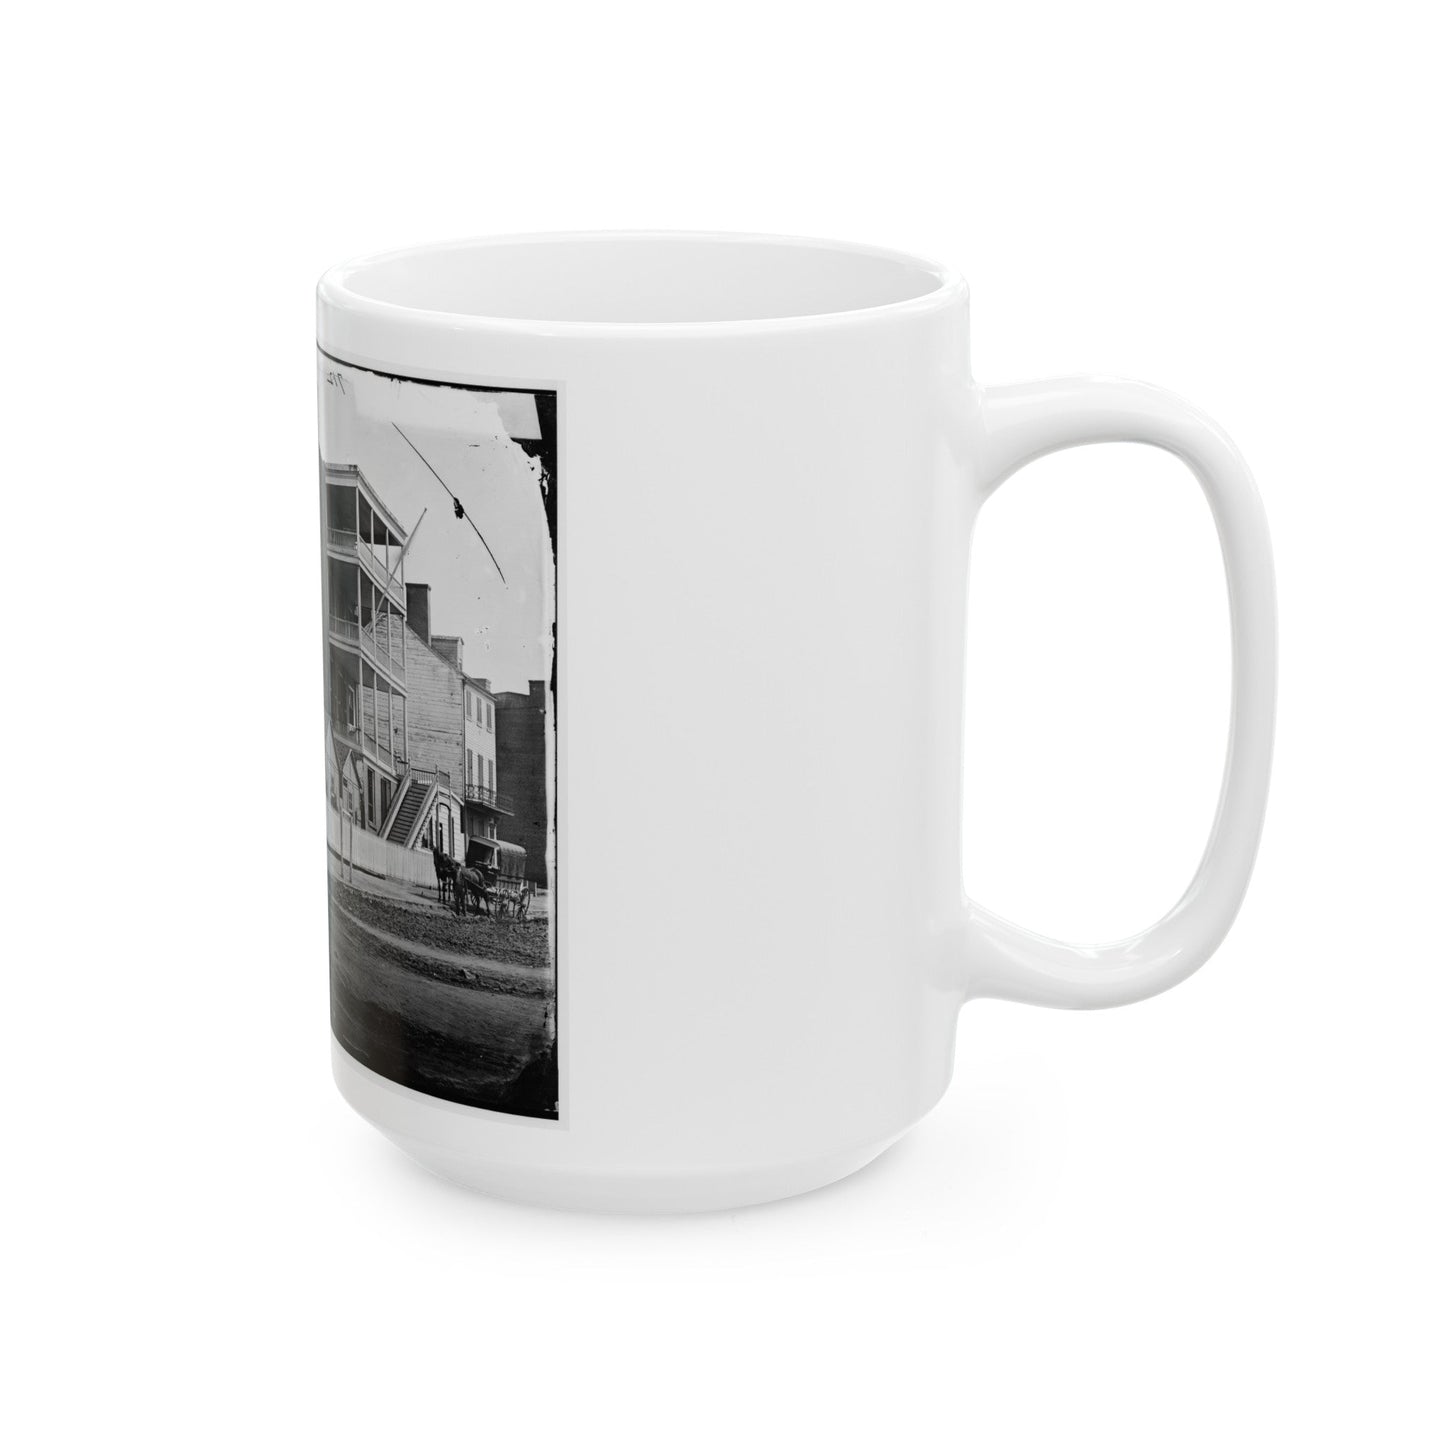 Washington, D.C. Buildings Of The Sanitary Commission Home Lodge For Invalid Soldiers, North Capitol Near C St. (U.S. Civil War) White Coffee Mug